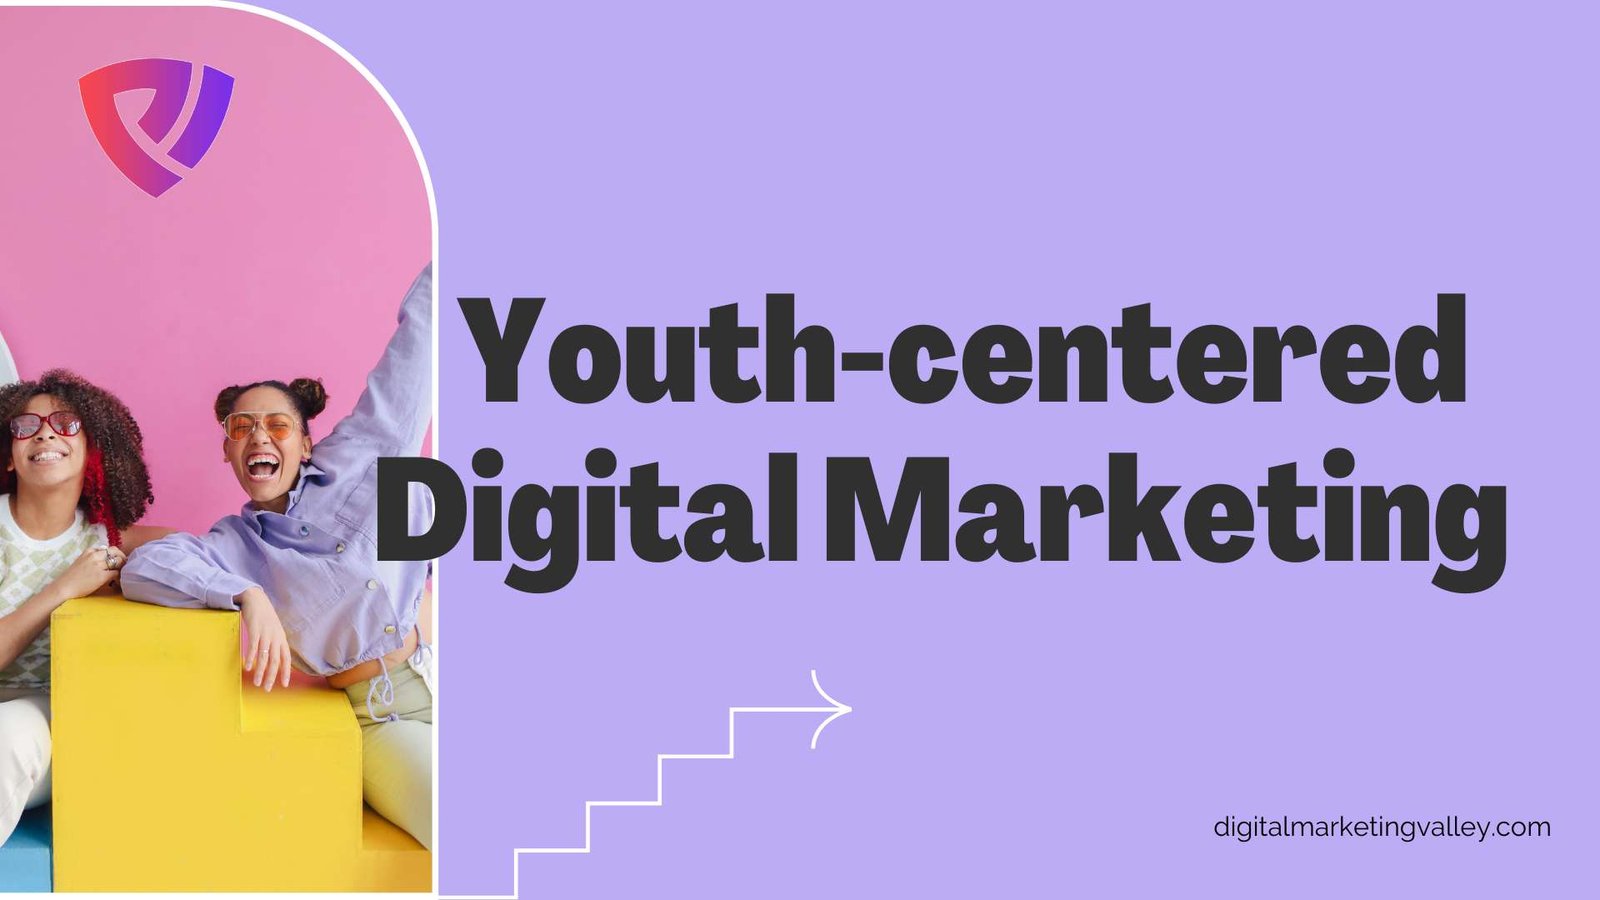 How can youth-centered marketing be implemented in a digital marketing campaign